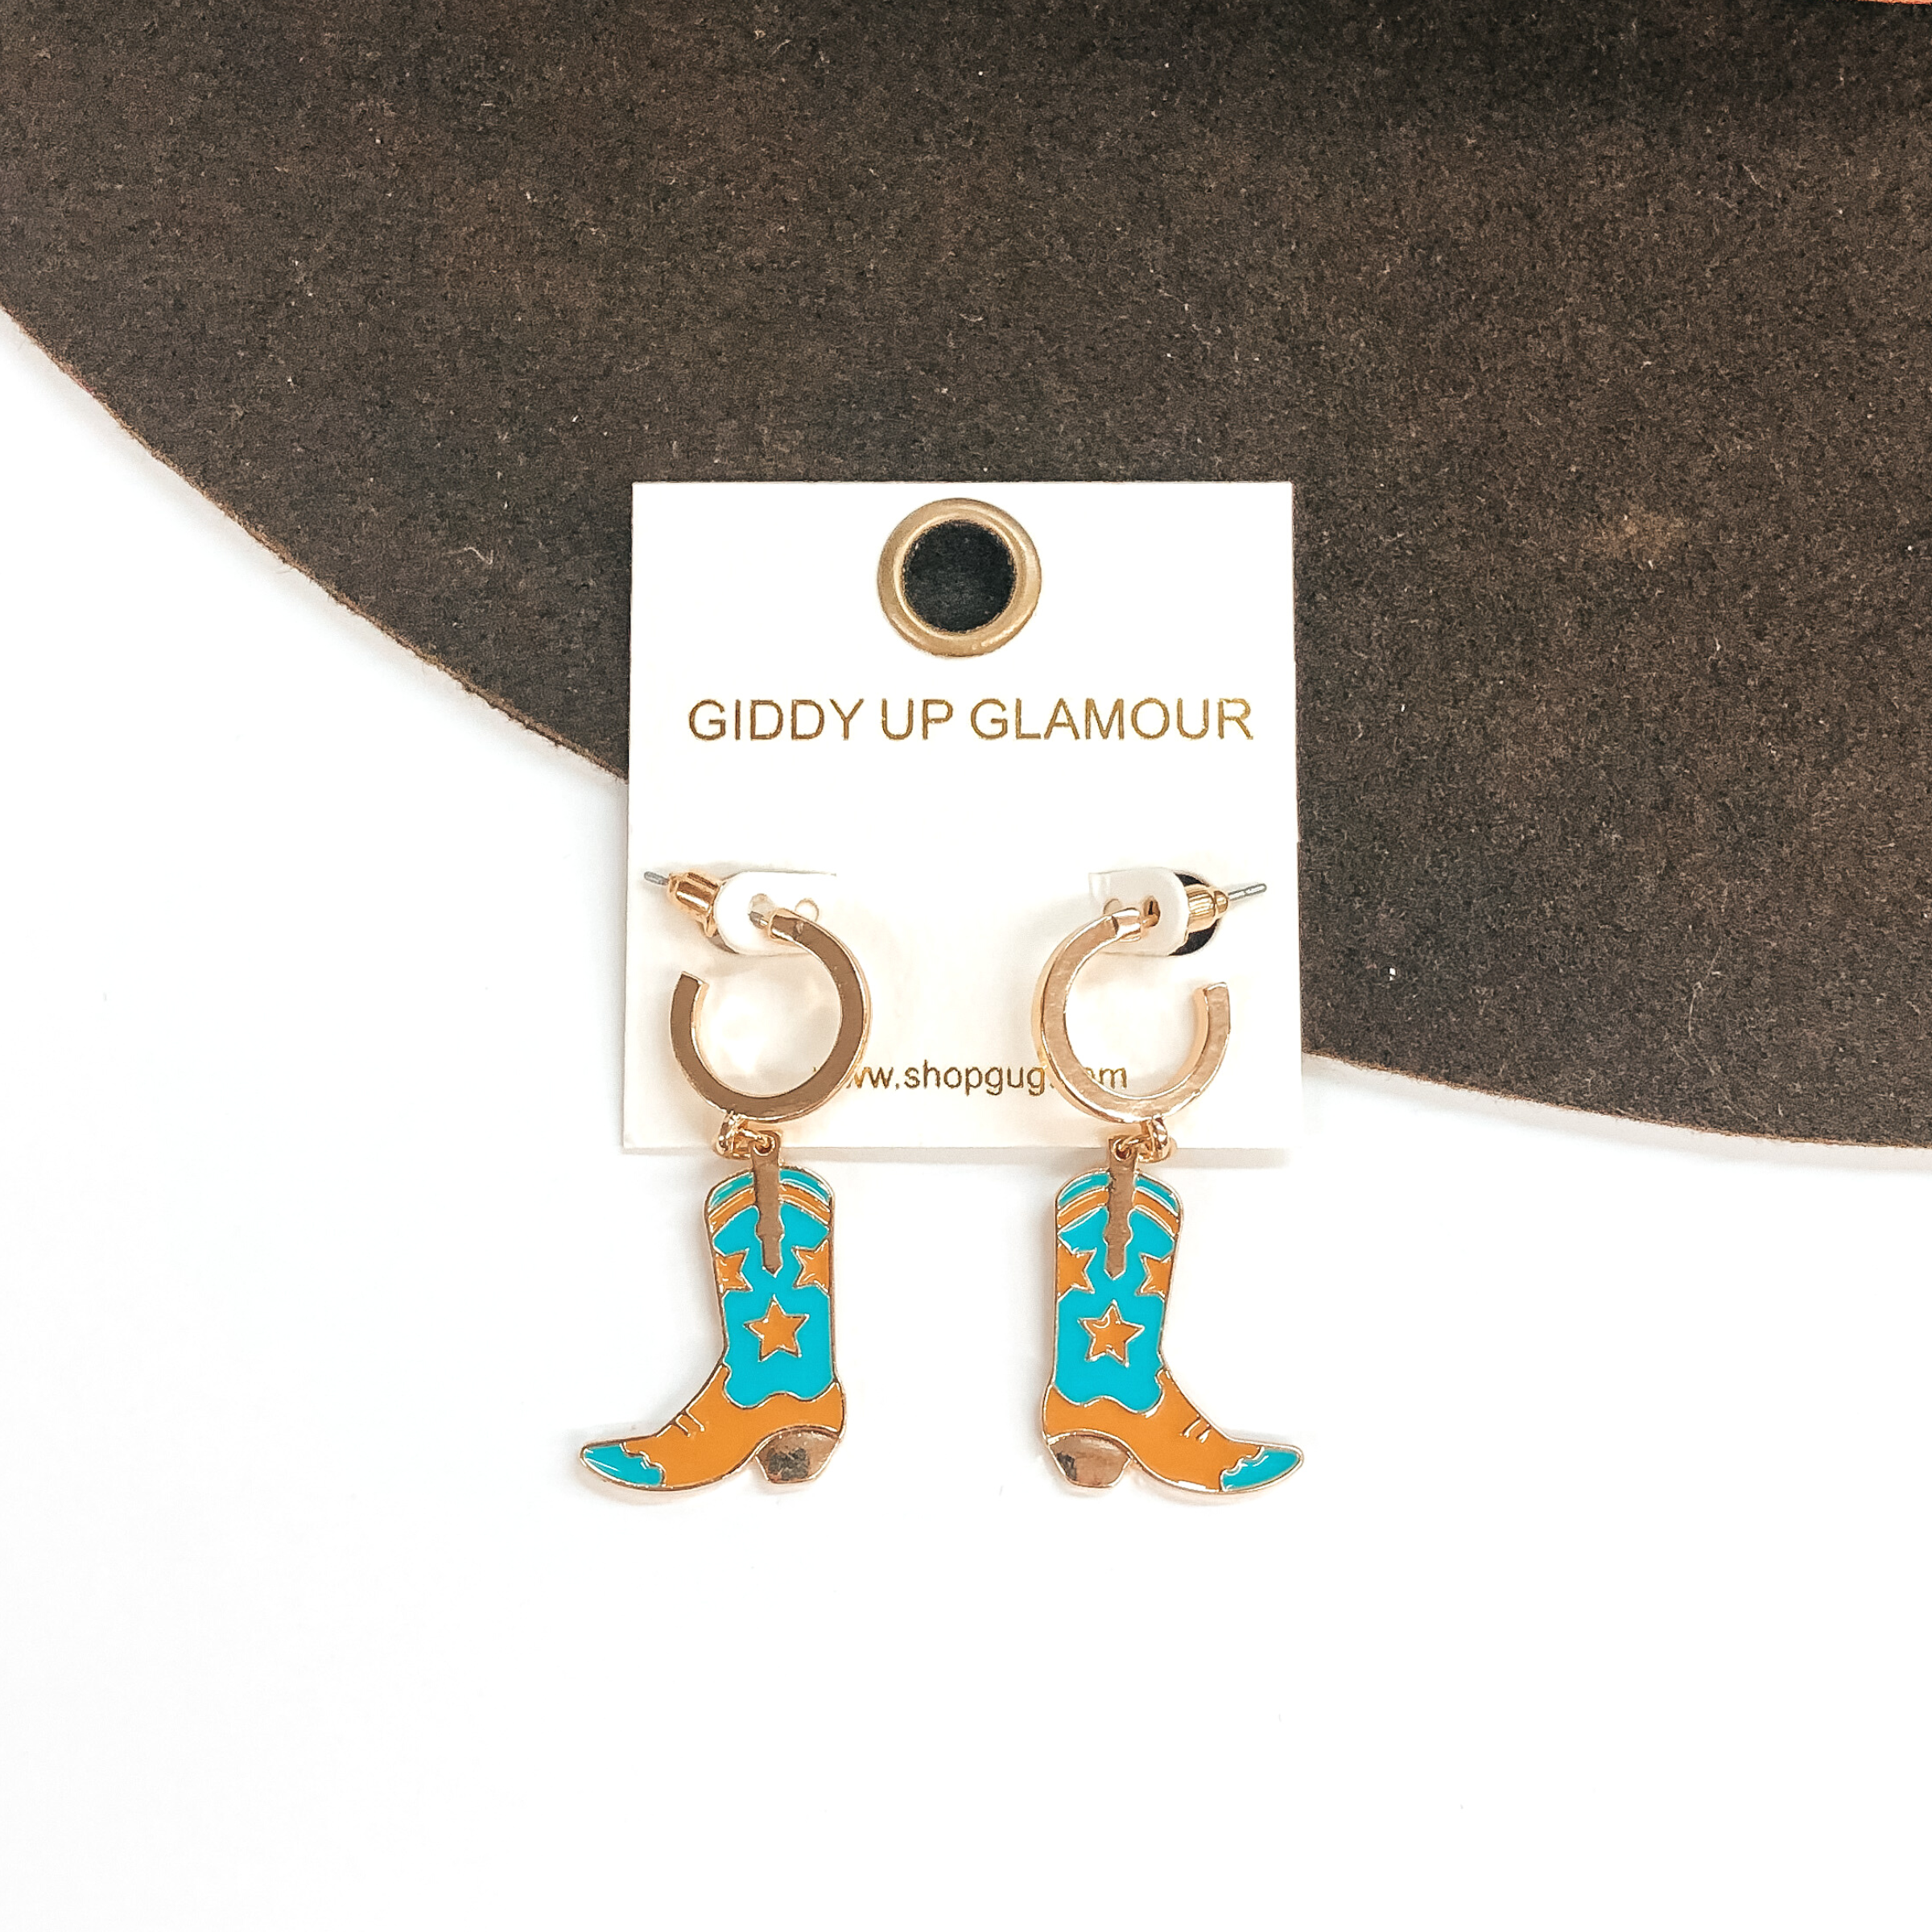 Small gold hoop earrings with a turquoise and tan boot pendant hanging from the bottom. These earrings are pictured on a white and brown background. 